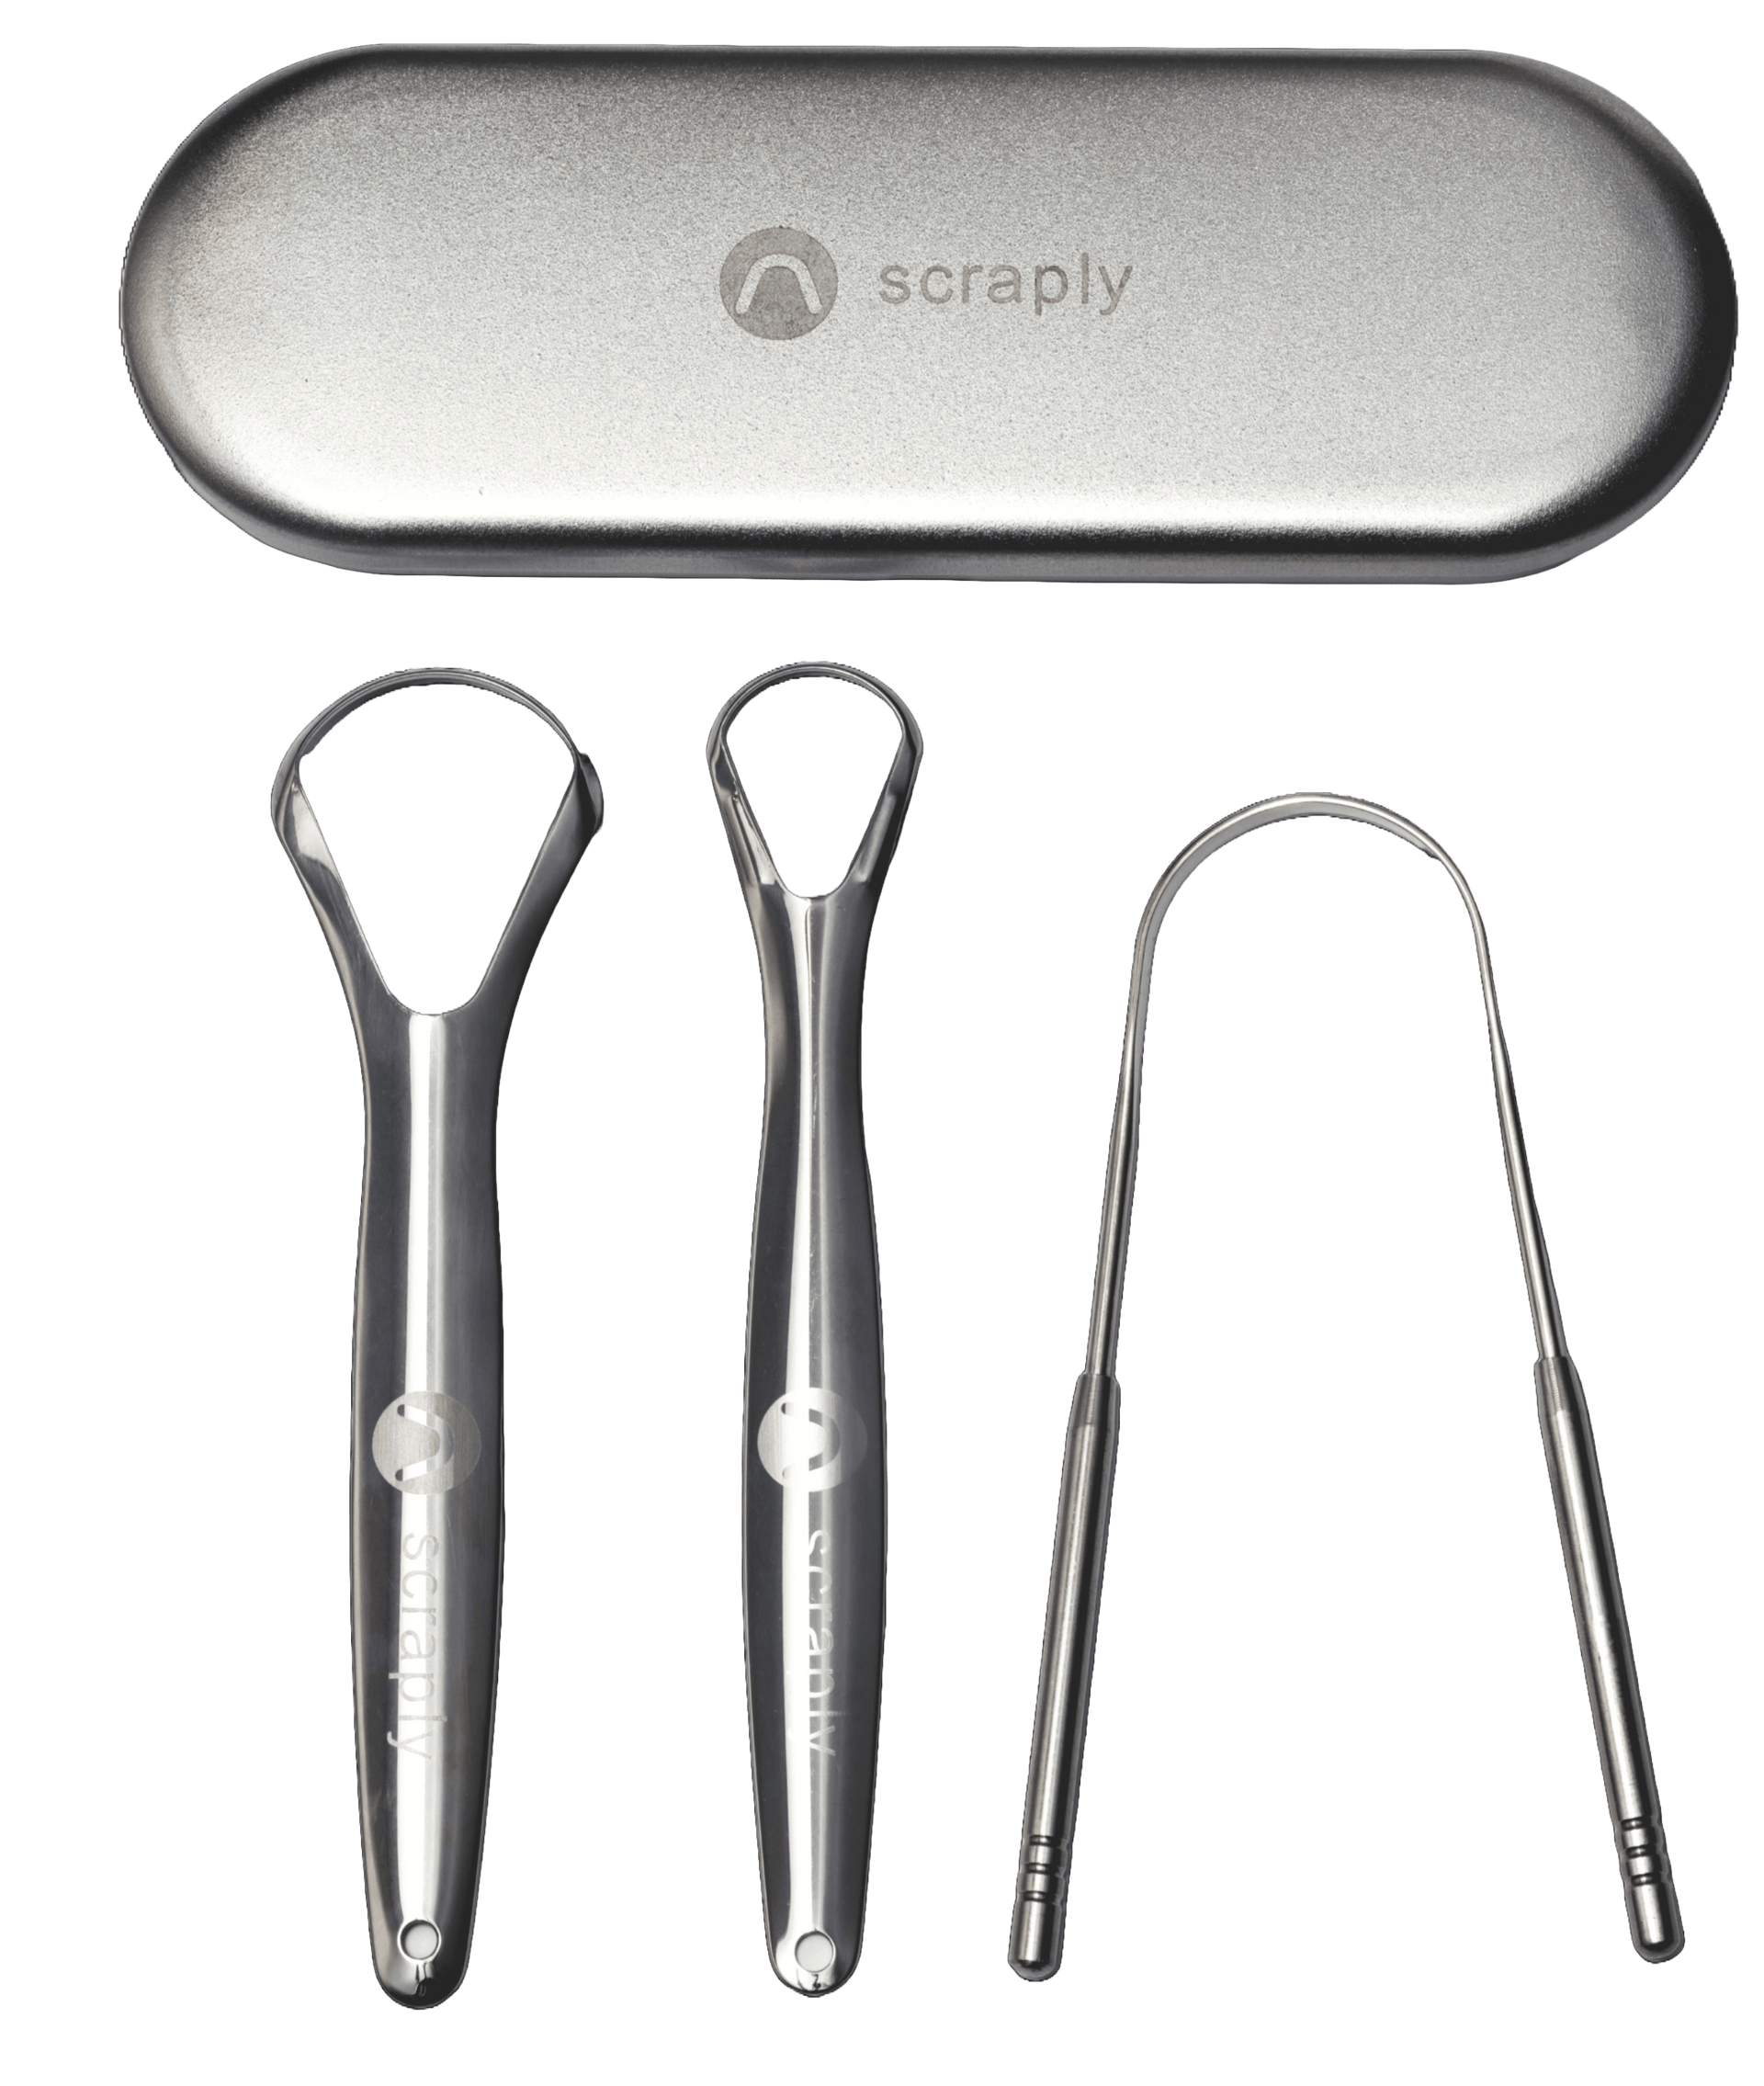 3 in 1 Stainless Steel Tongue Scrapers